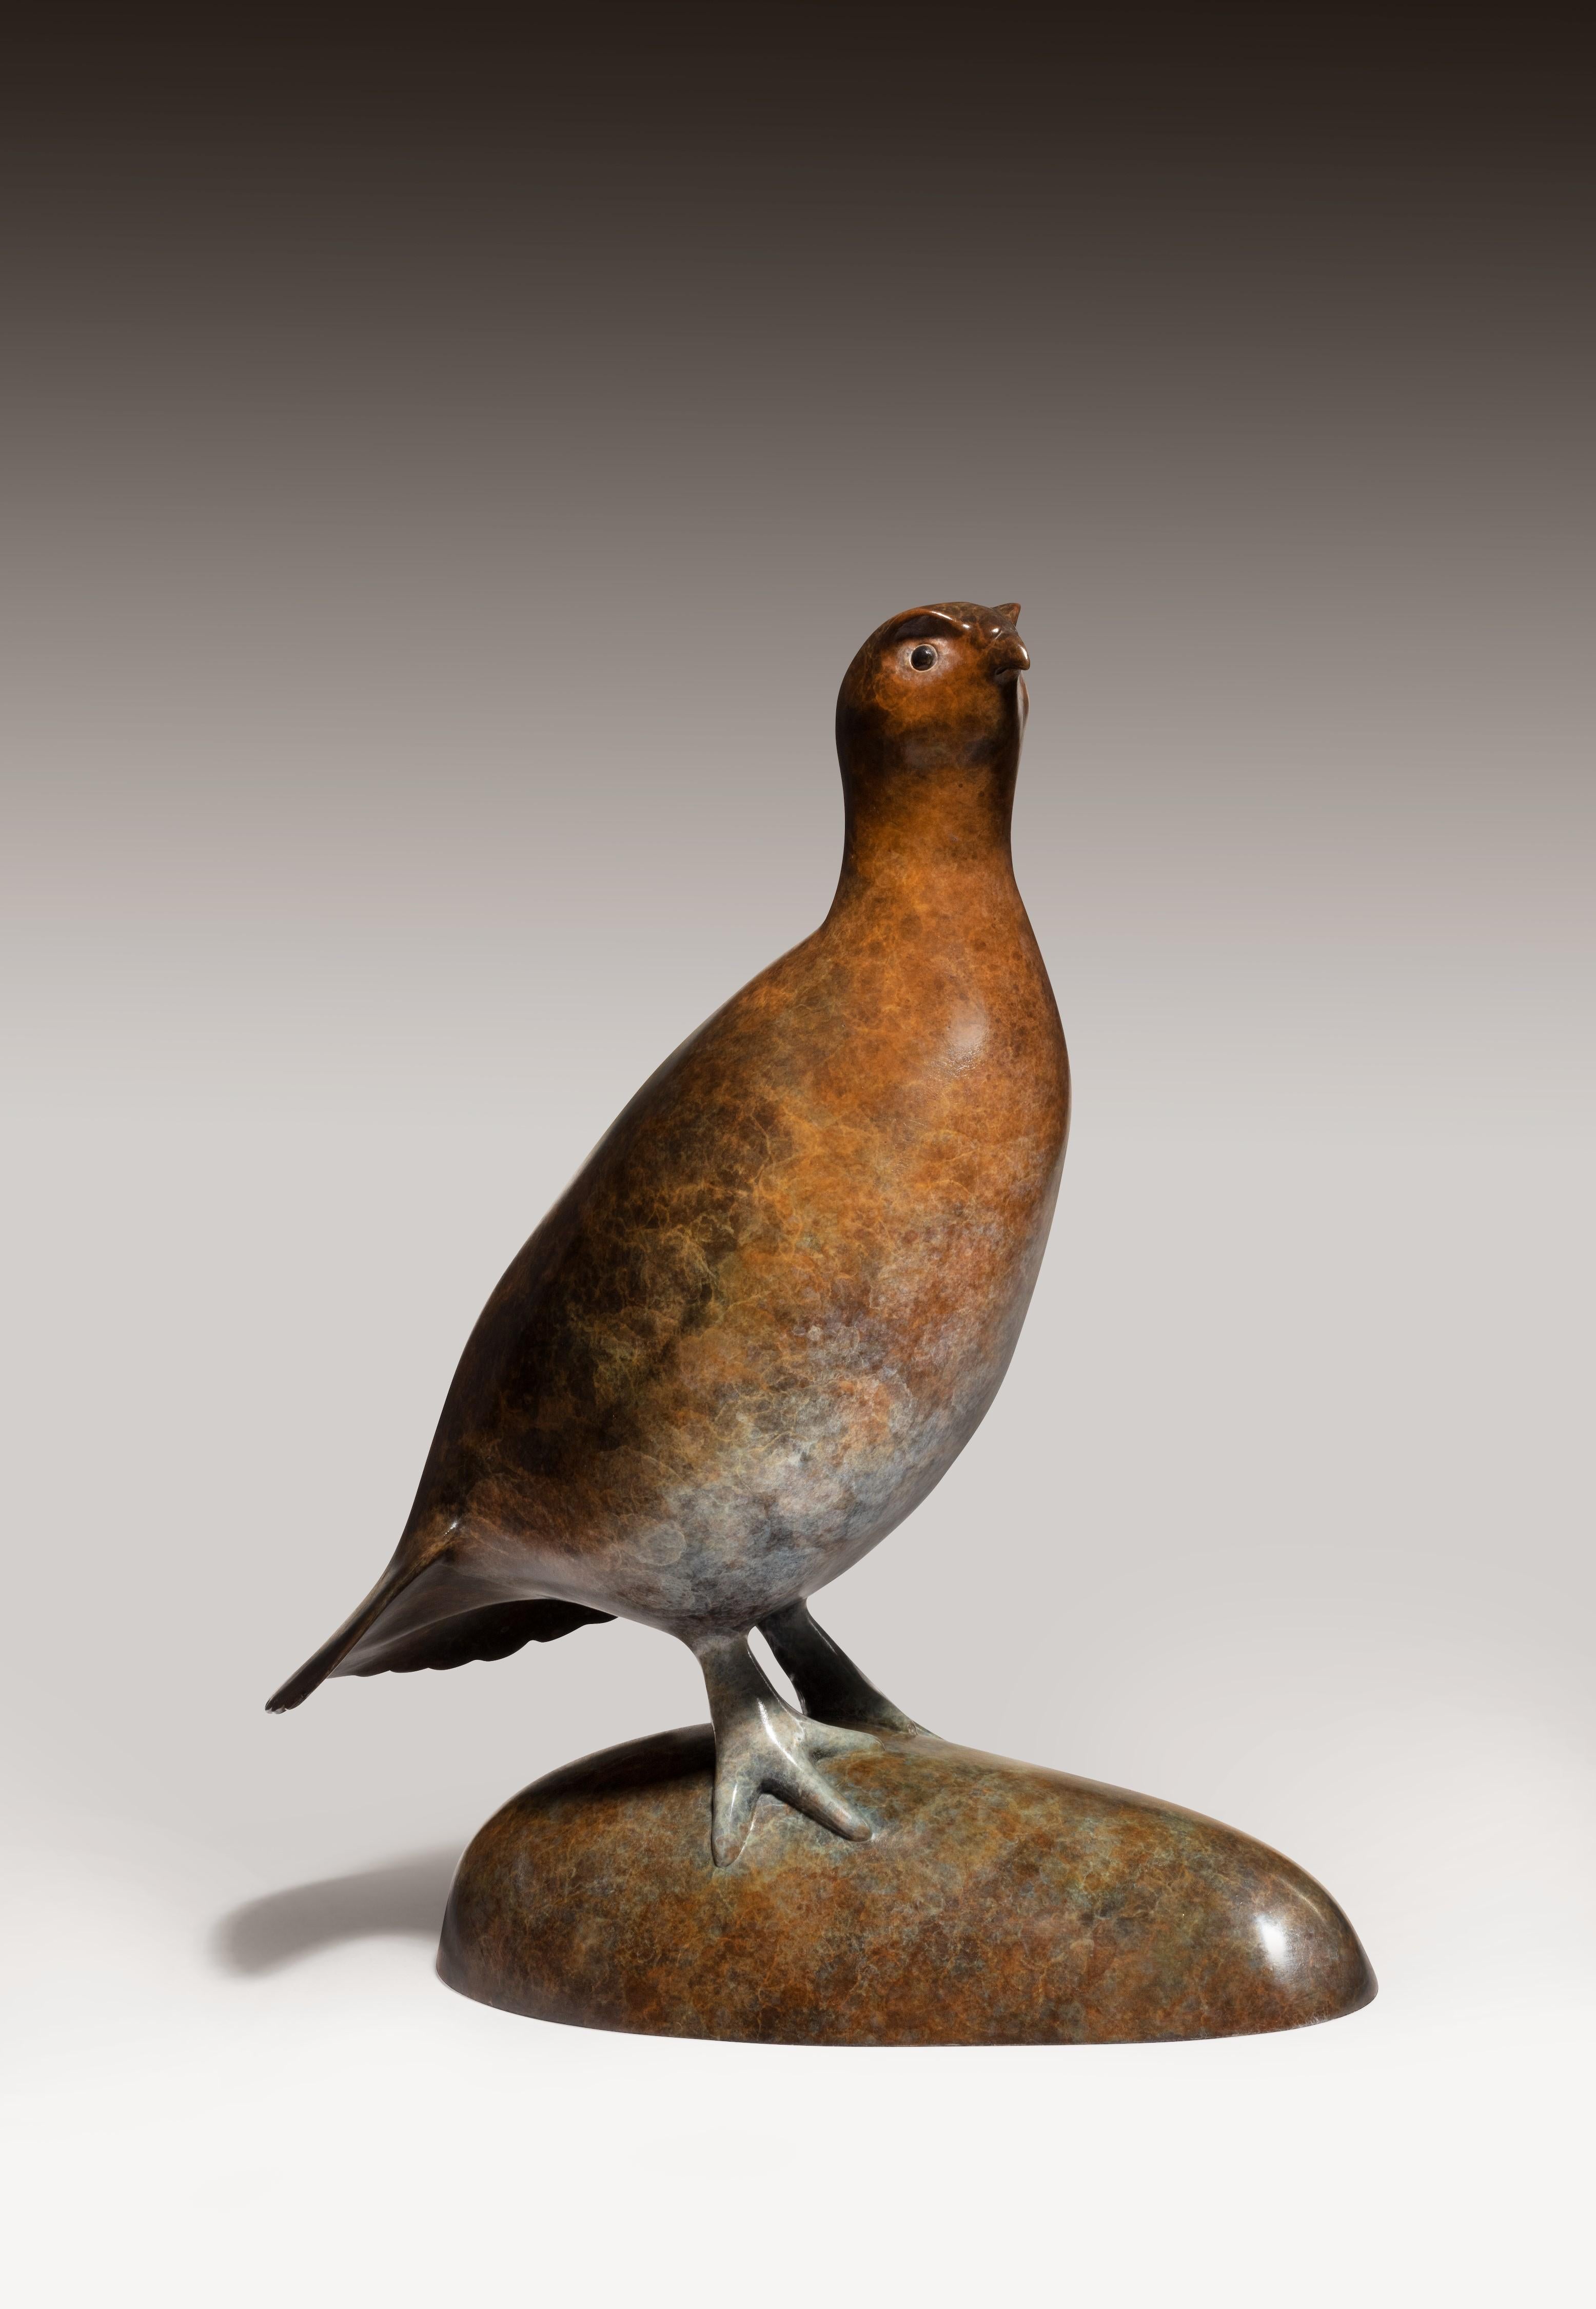 Richard Smith b.1955 Figurative Sculpture - 'Grouse' Contemporary Bronze Country Wildlife Bird Sculpture, patinated brown